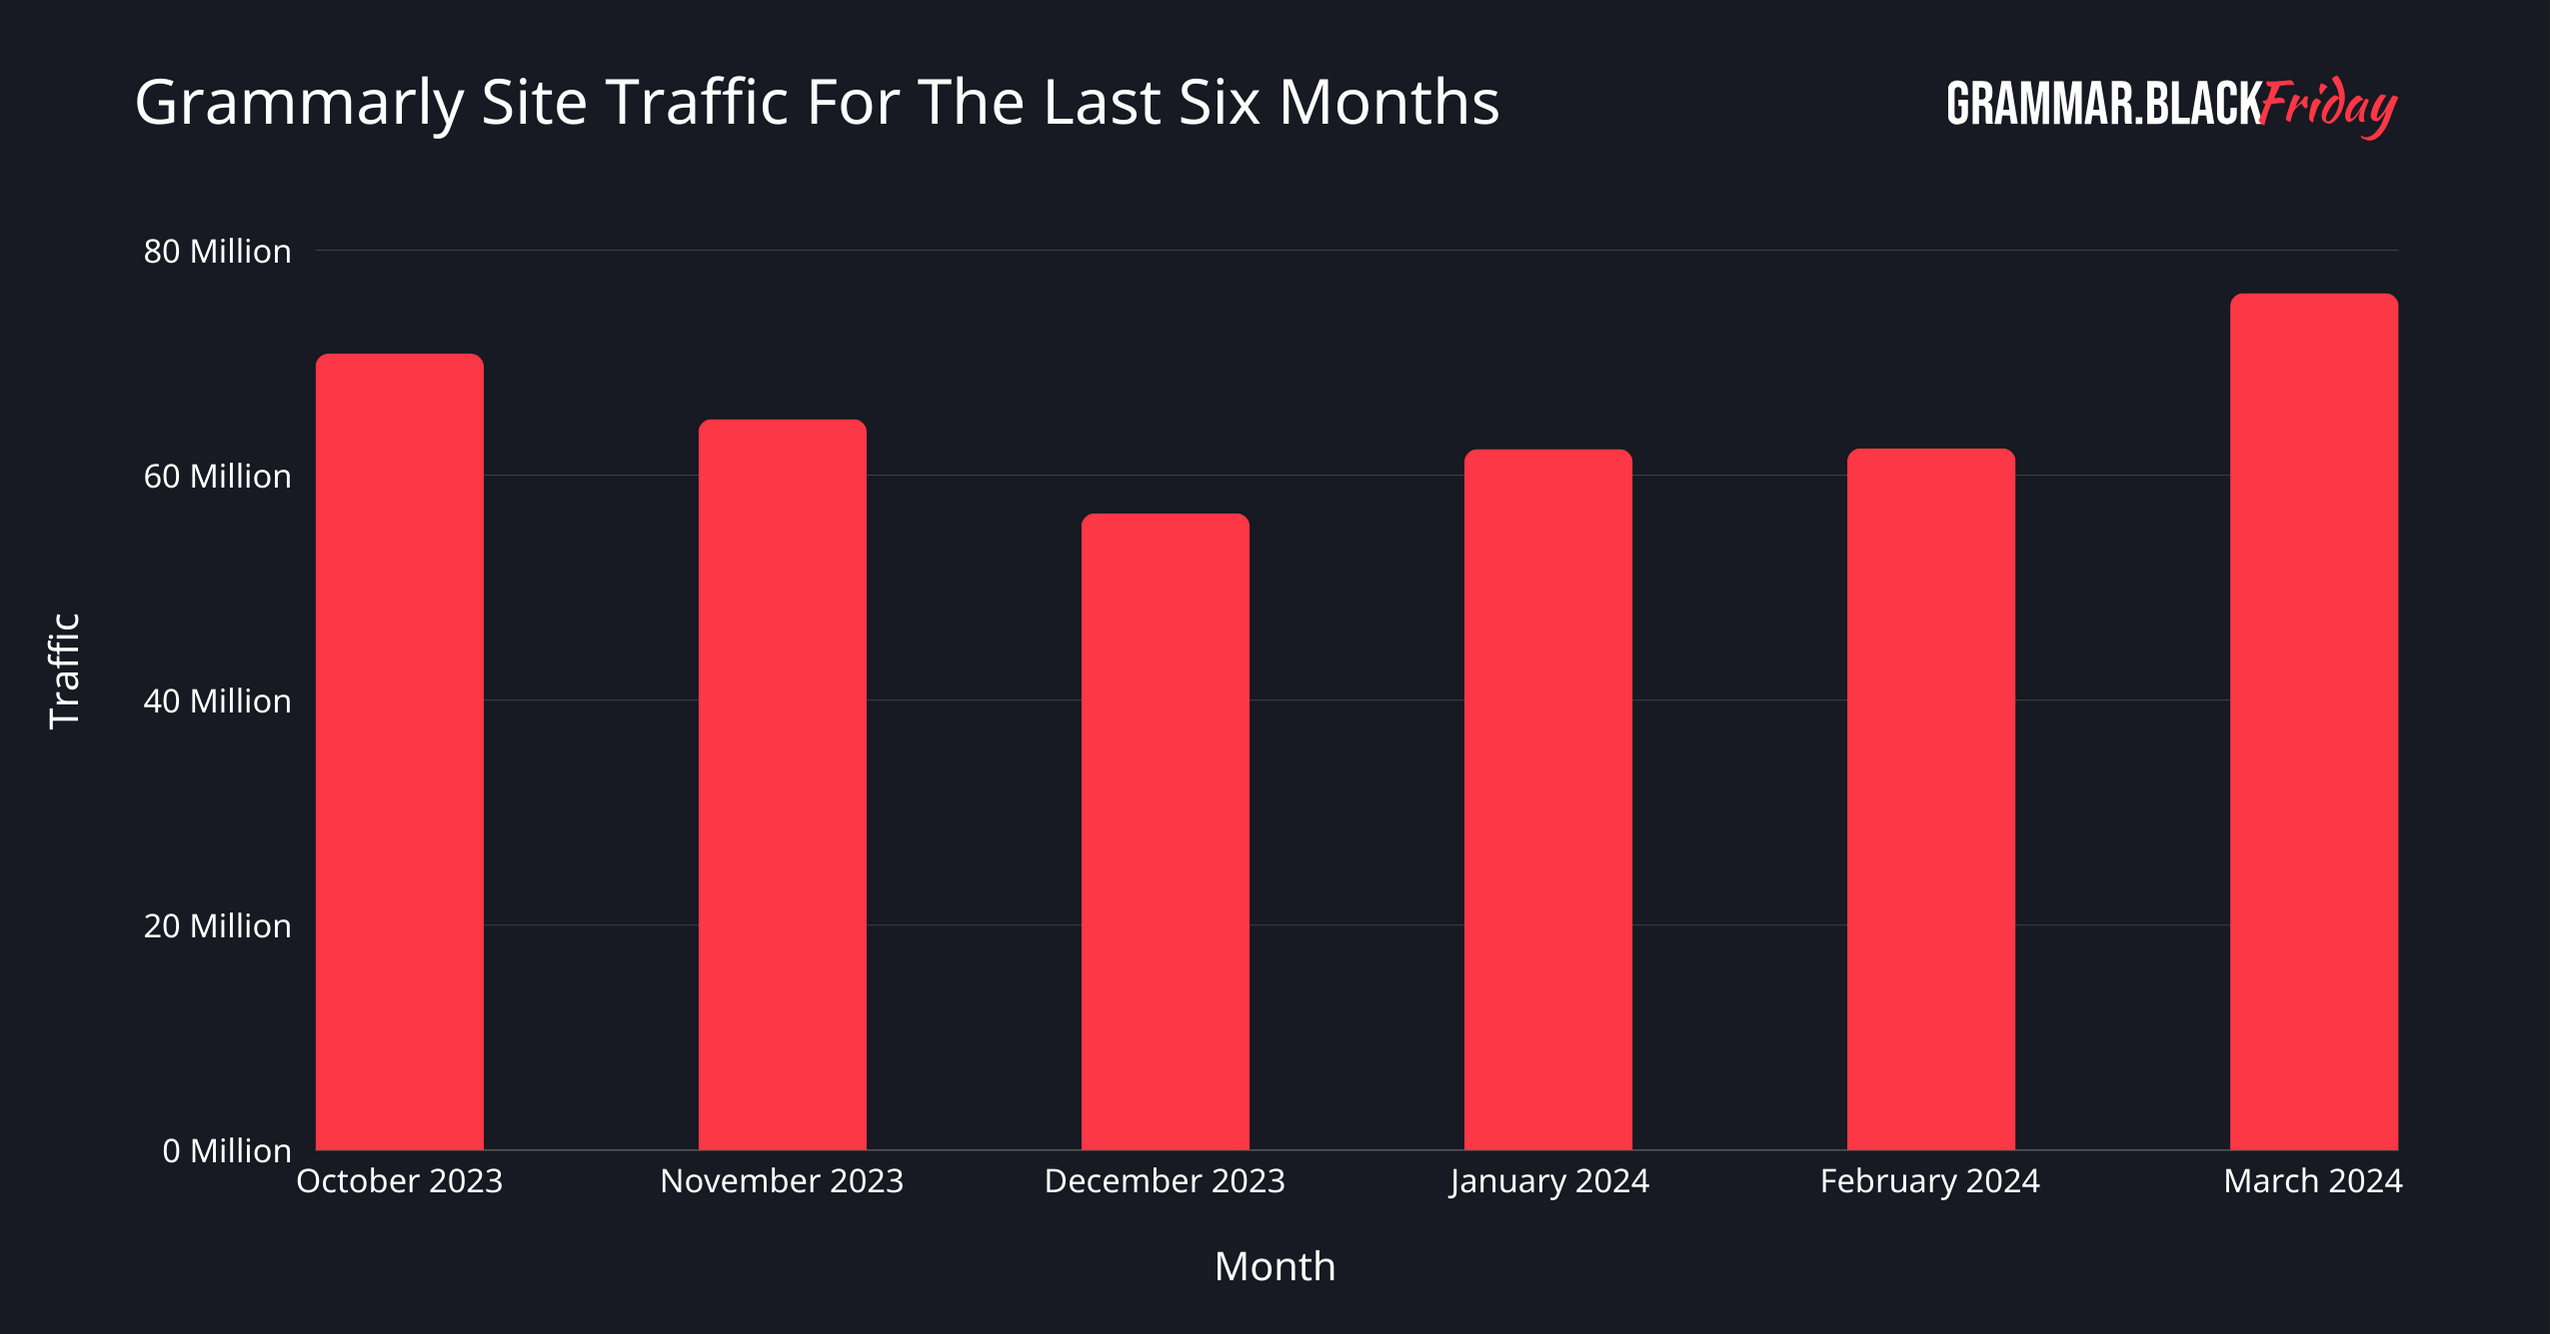 Grammarly Site Traffic For The Last Six Months